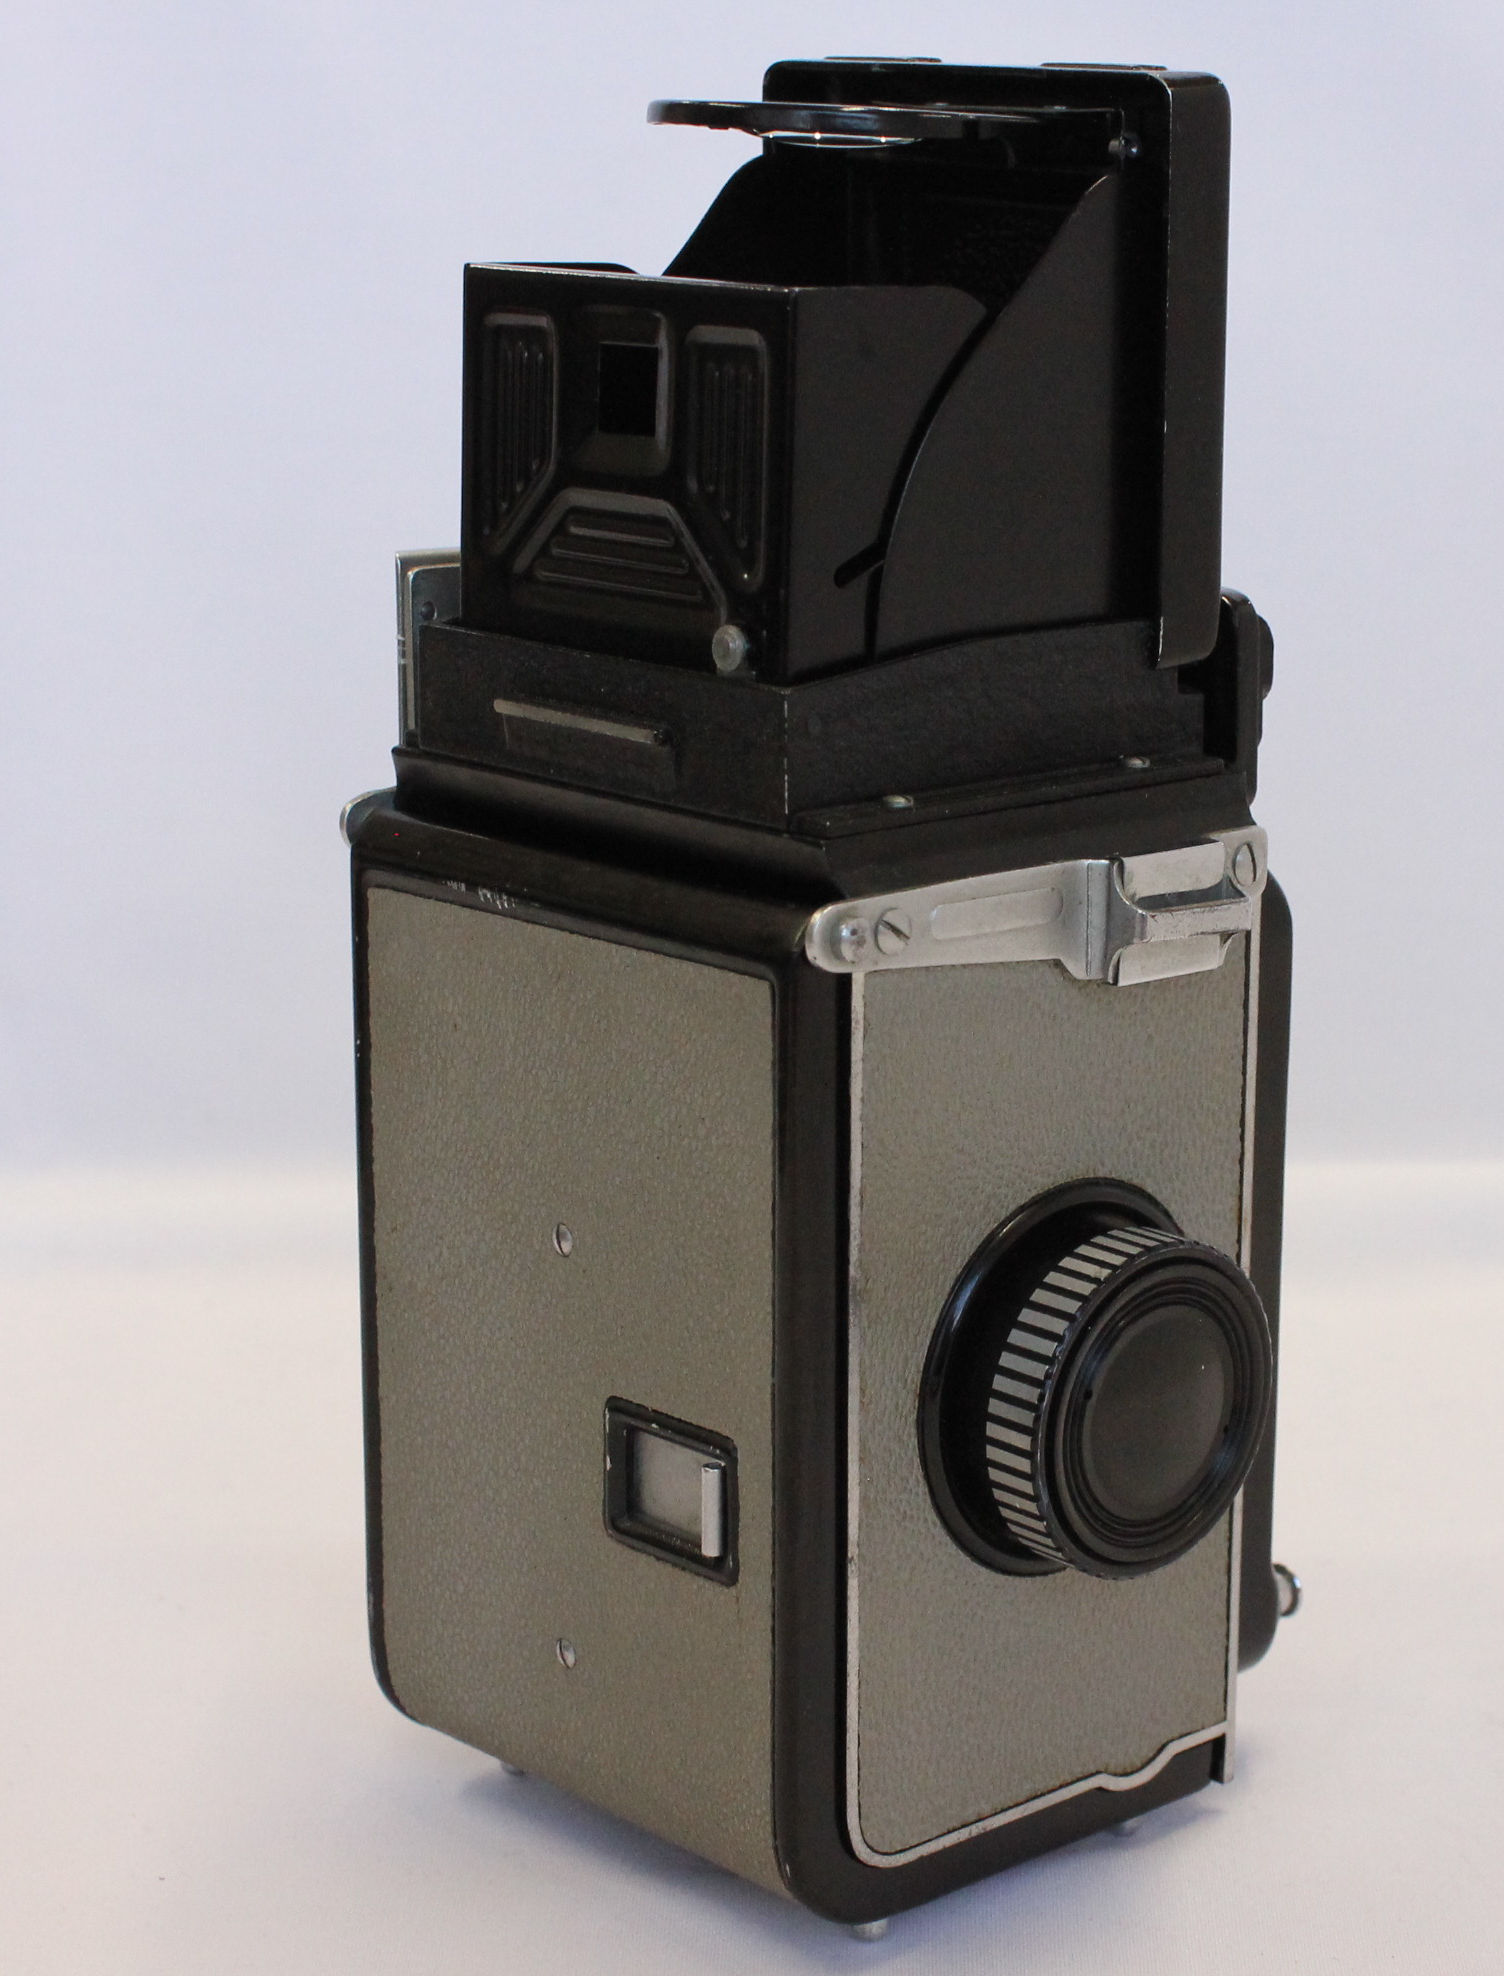   Yashica 44 A 127 4x4 TLR Camera w/ Yashikor 60mm F3.5 Lens from Japan Photo 4